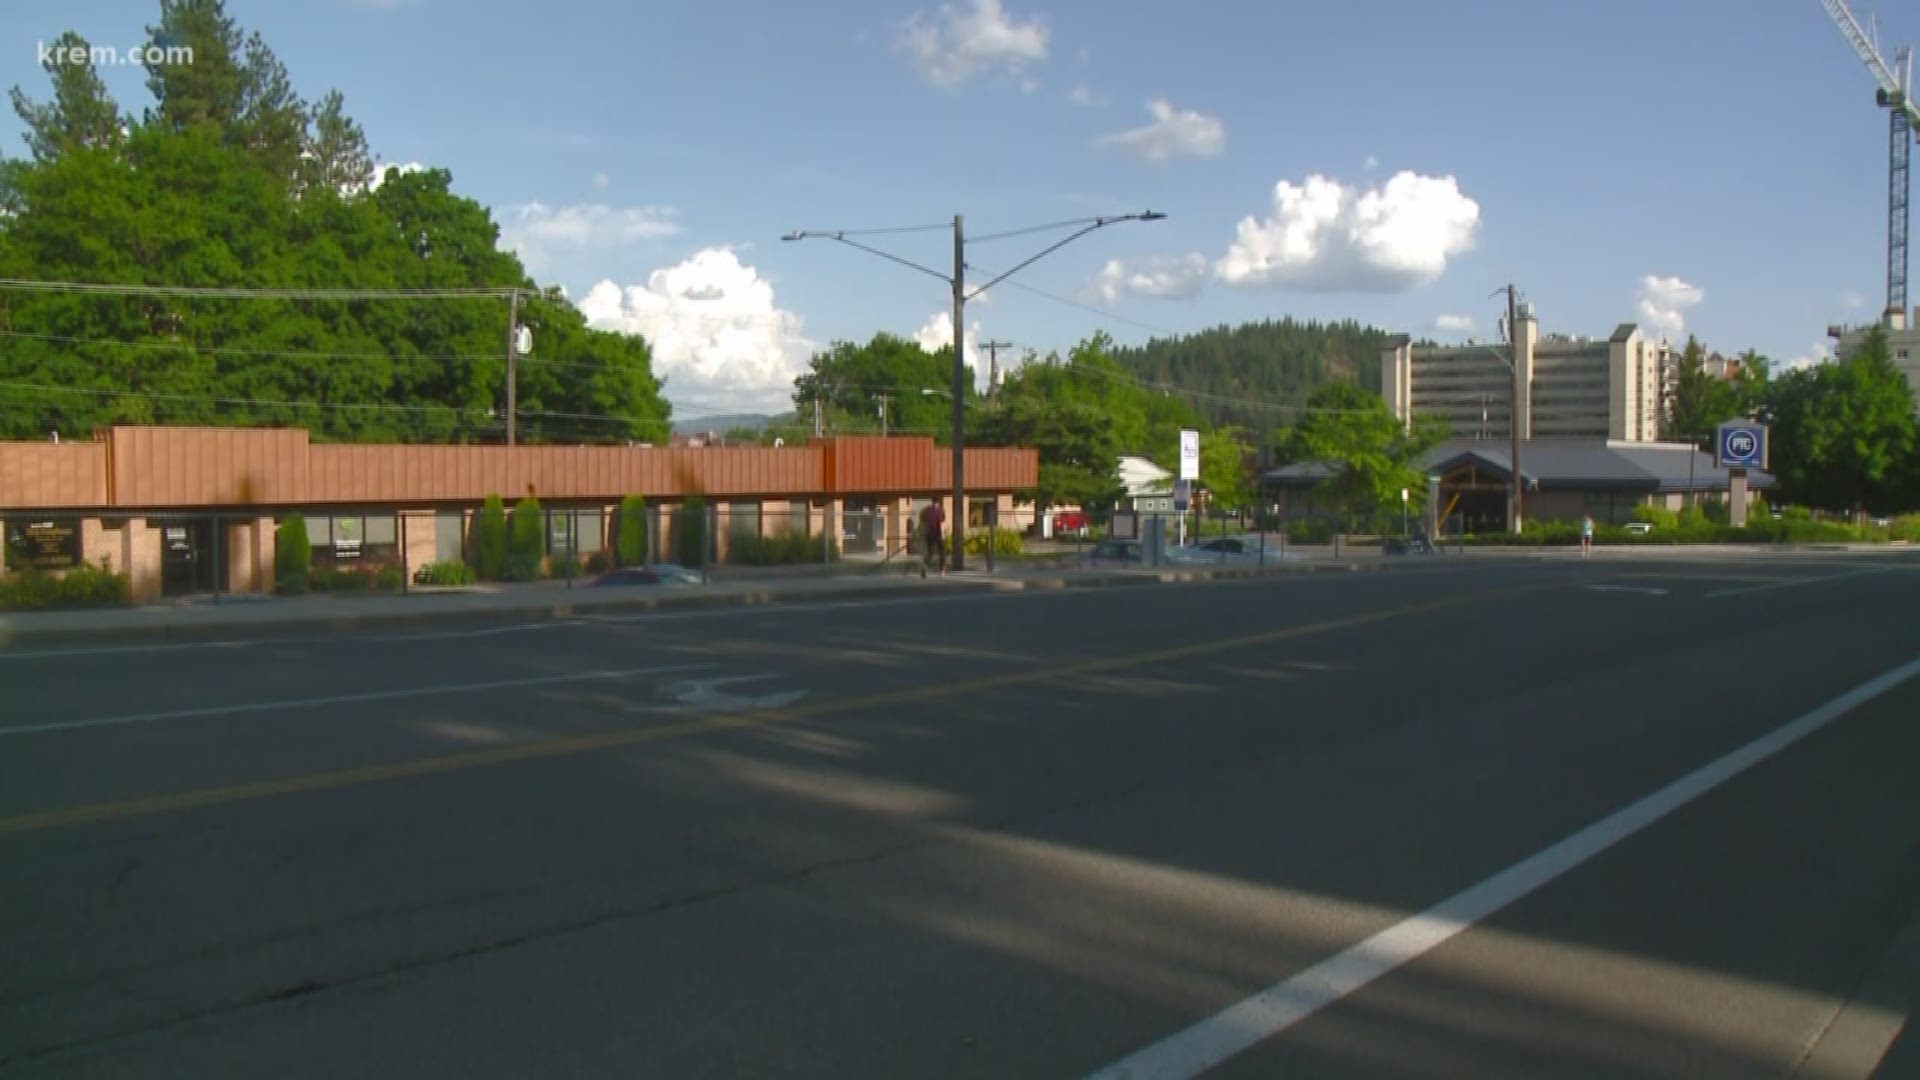 The Coeur d'Alene Police Department responded to a bomb threat downtown. The device has been gathered and roads have reopened.